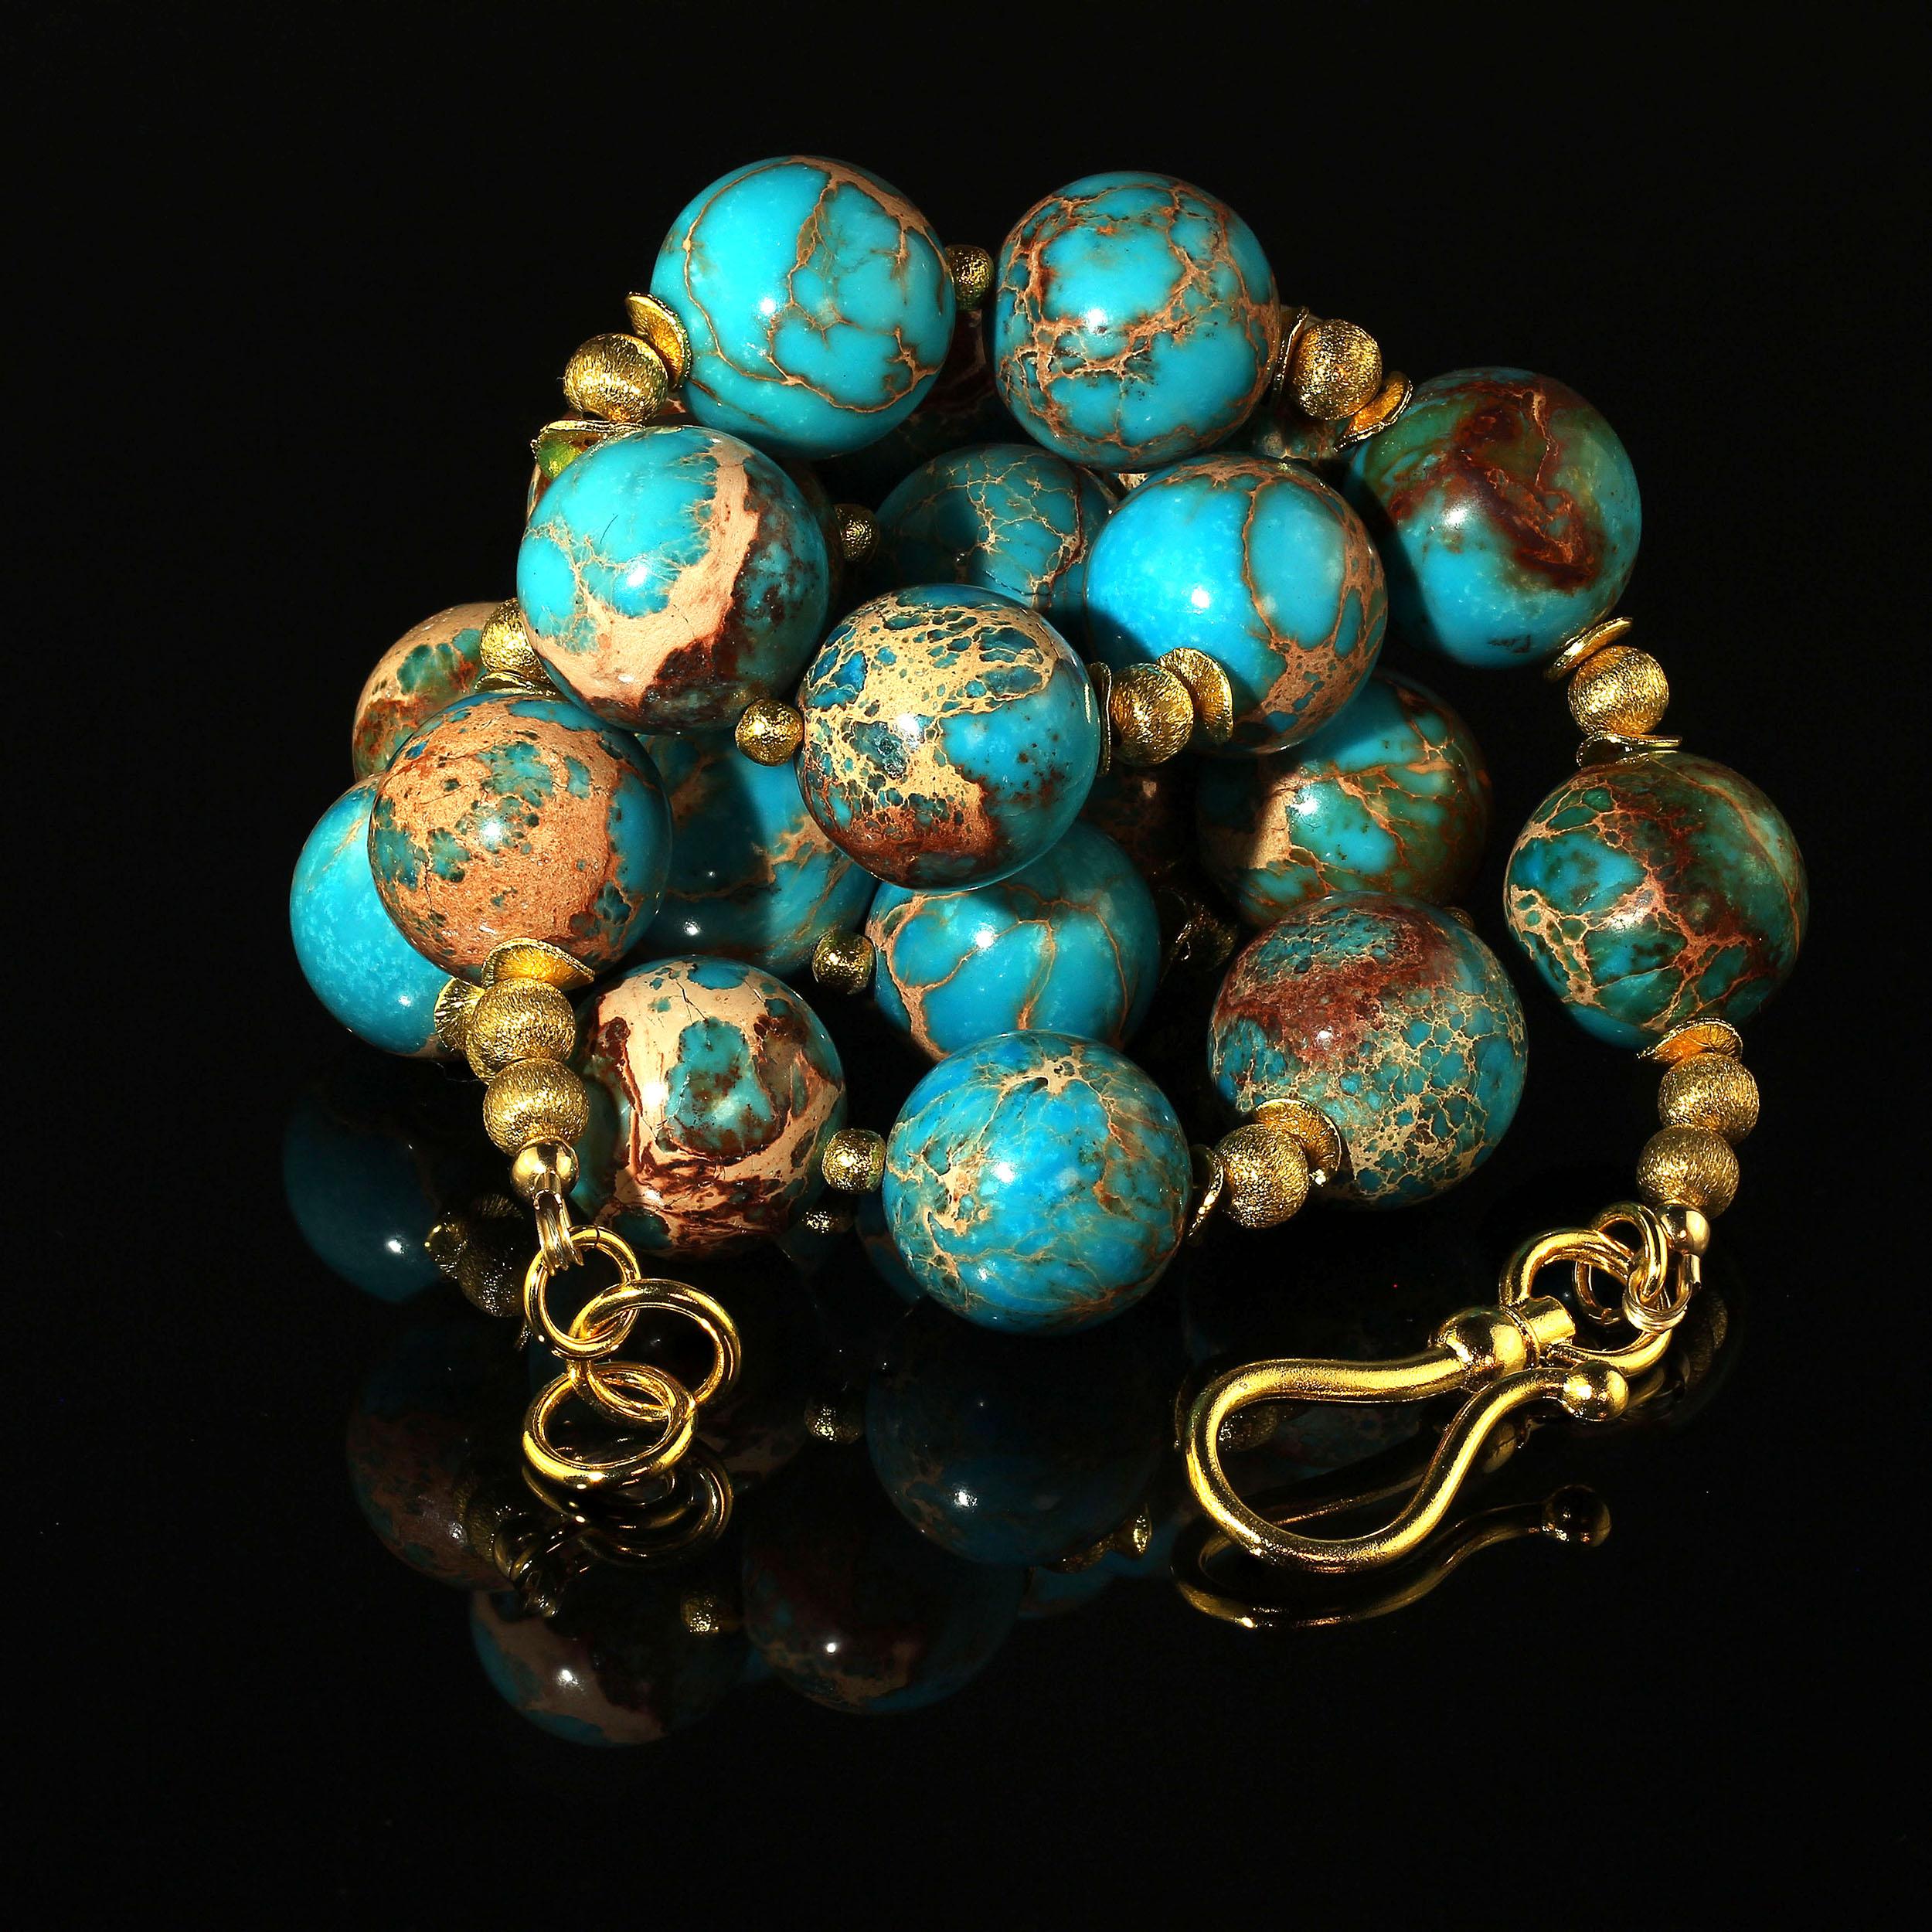 Fun loving turquoise color Desert Jasper and goldy accents necklace.  This 23 inch necklace is perfect to enhance all winter colors.  Wear this with black, brown, blue, and wow, red and green. These 18 MM Desert Jasper are lovely mottled turquoise,